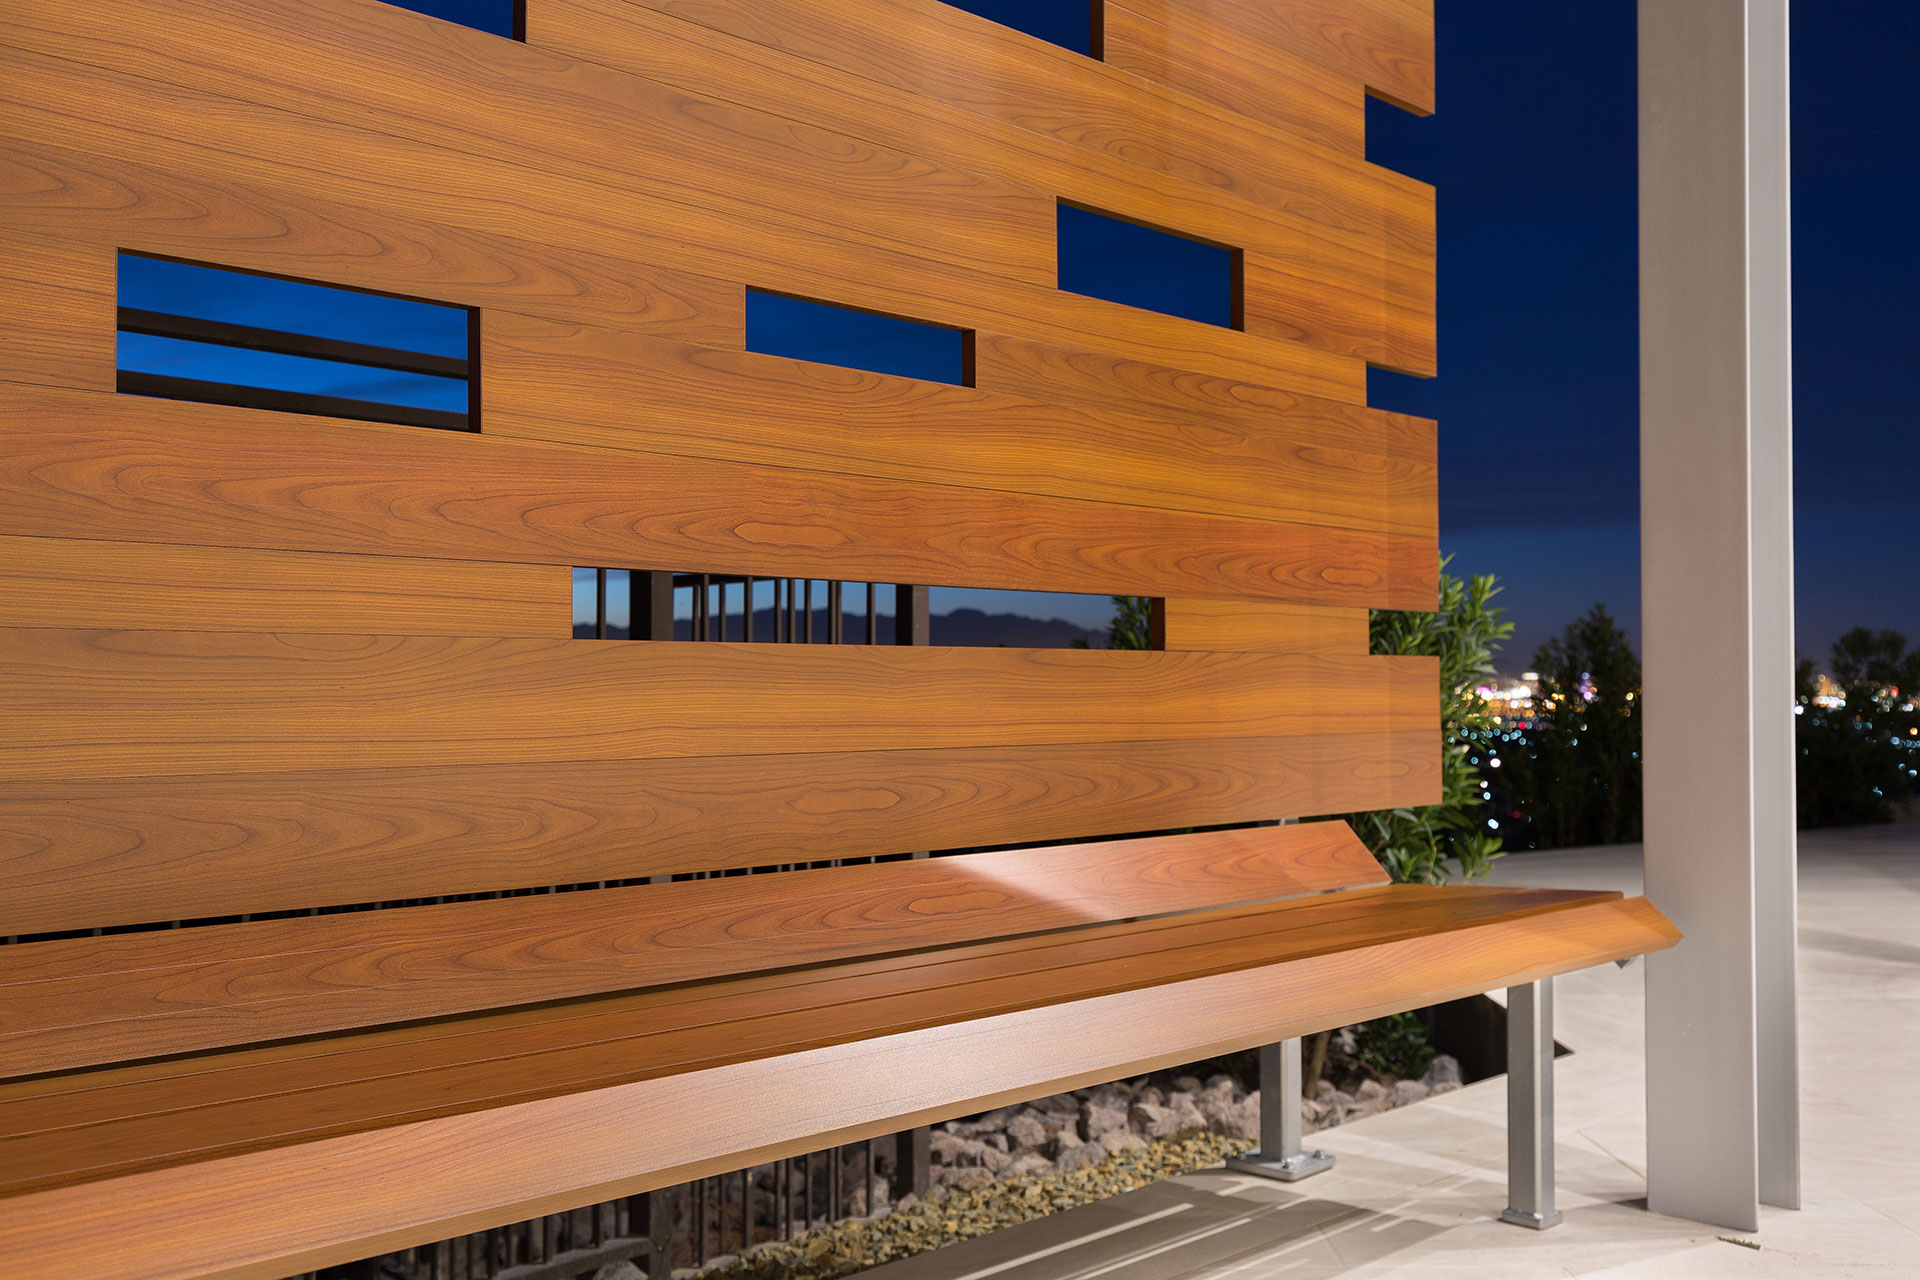 A wood-like aluminum backyard bench on a light beige tiled patio with Las Vegas city lights in the background.